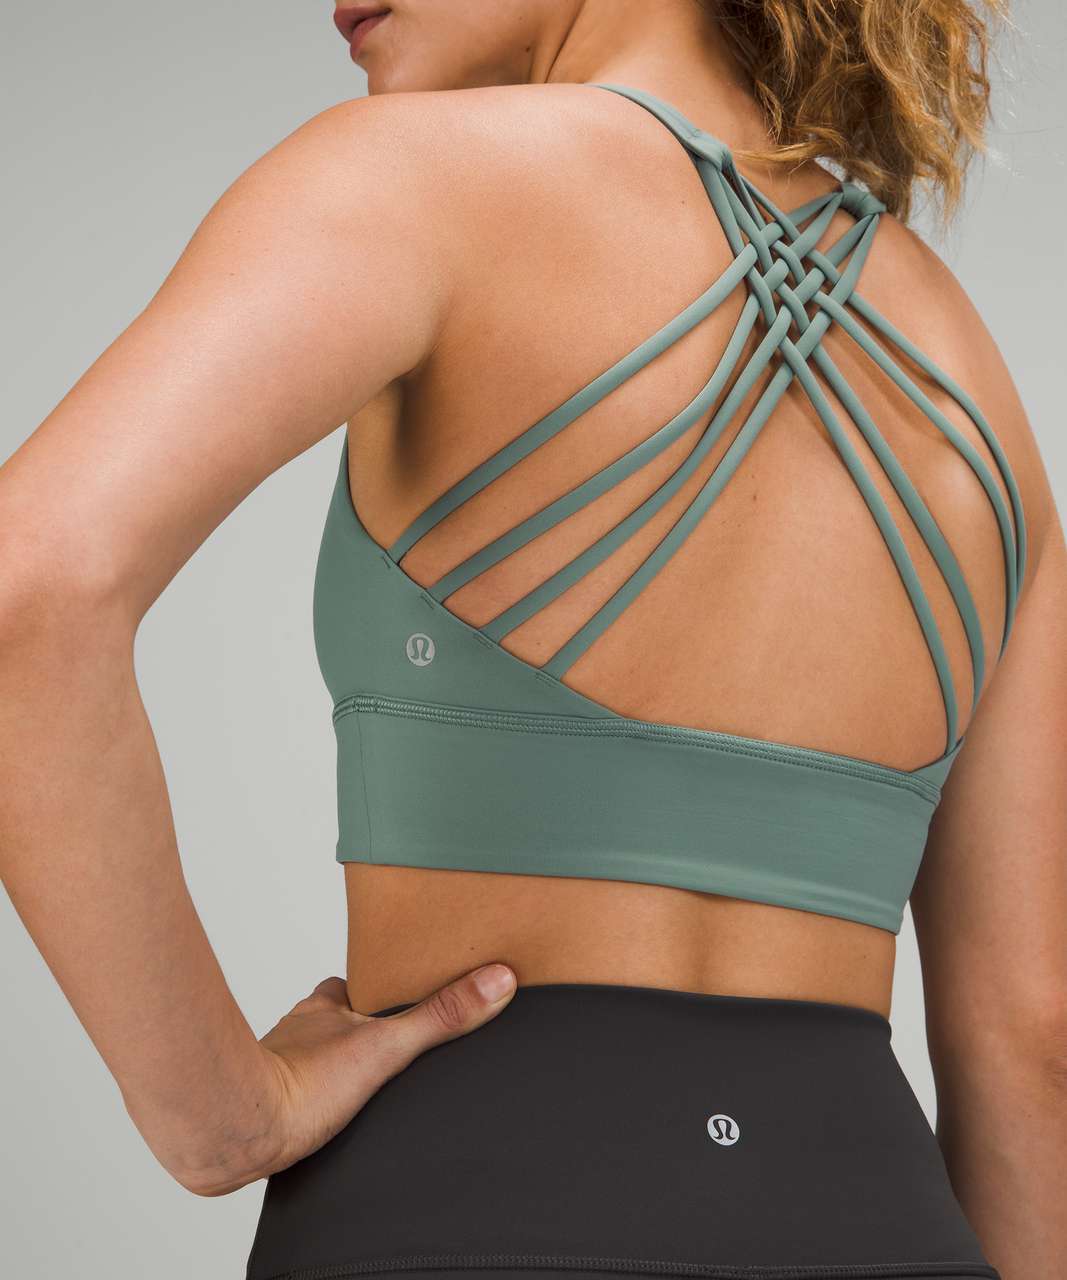 Lululemon Free to Be Long-Line Bra - Wild *Light Support, A/B Cups - Tidewater Teal